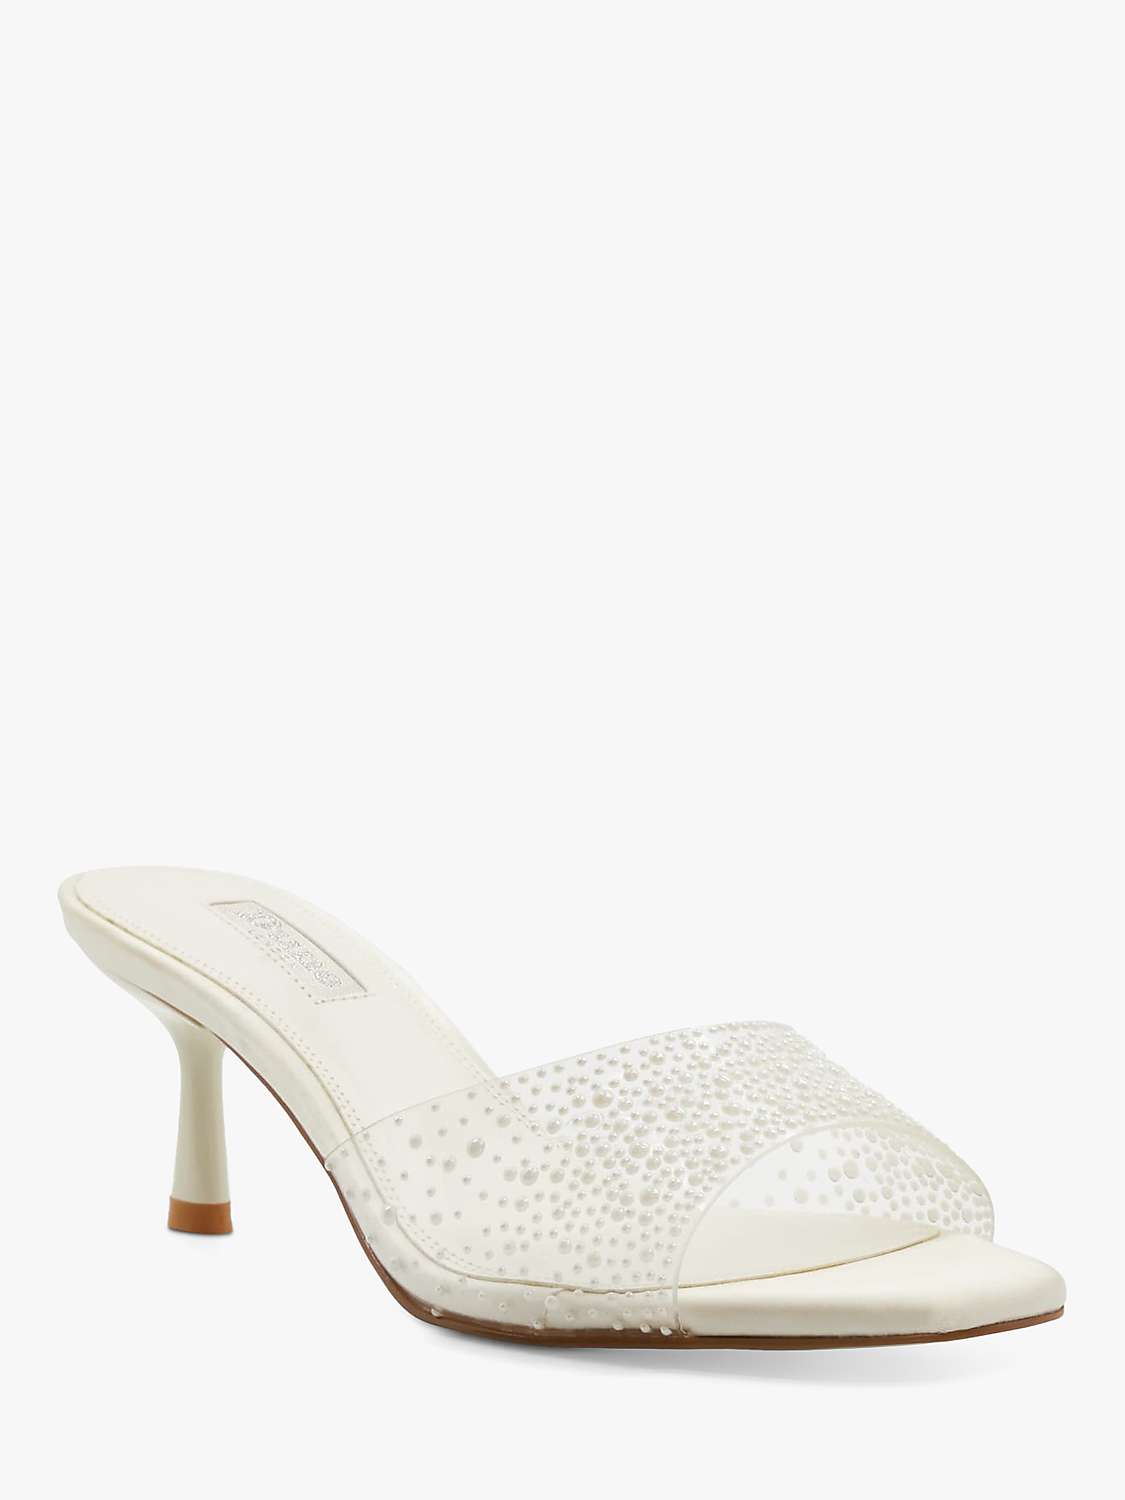 Buy Dune Bridal Collection Moonlit Sea Pearl Mules, Ivory Online at johnlewis.com